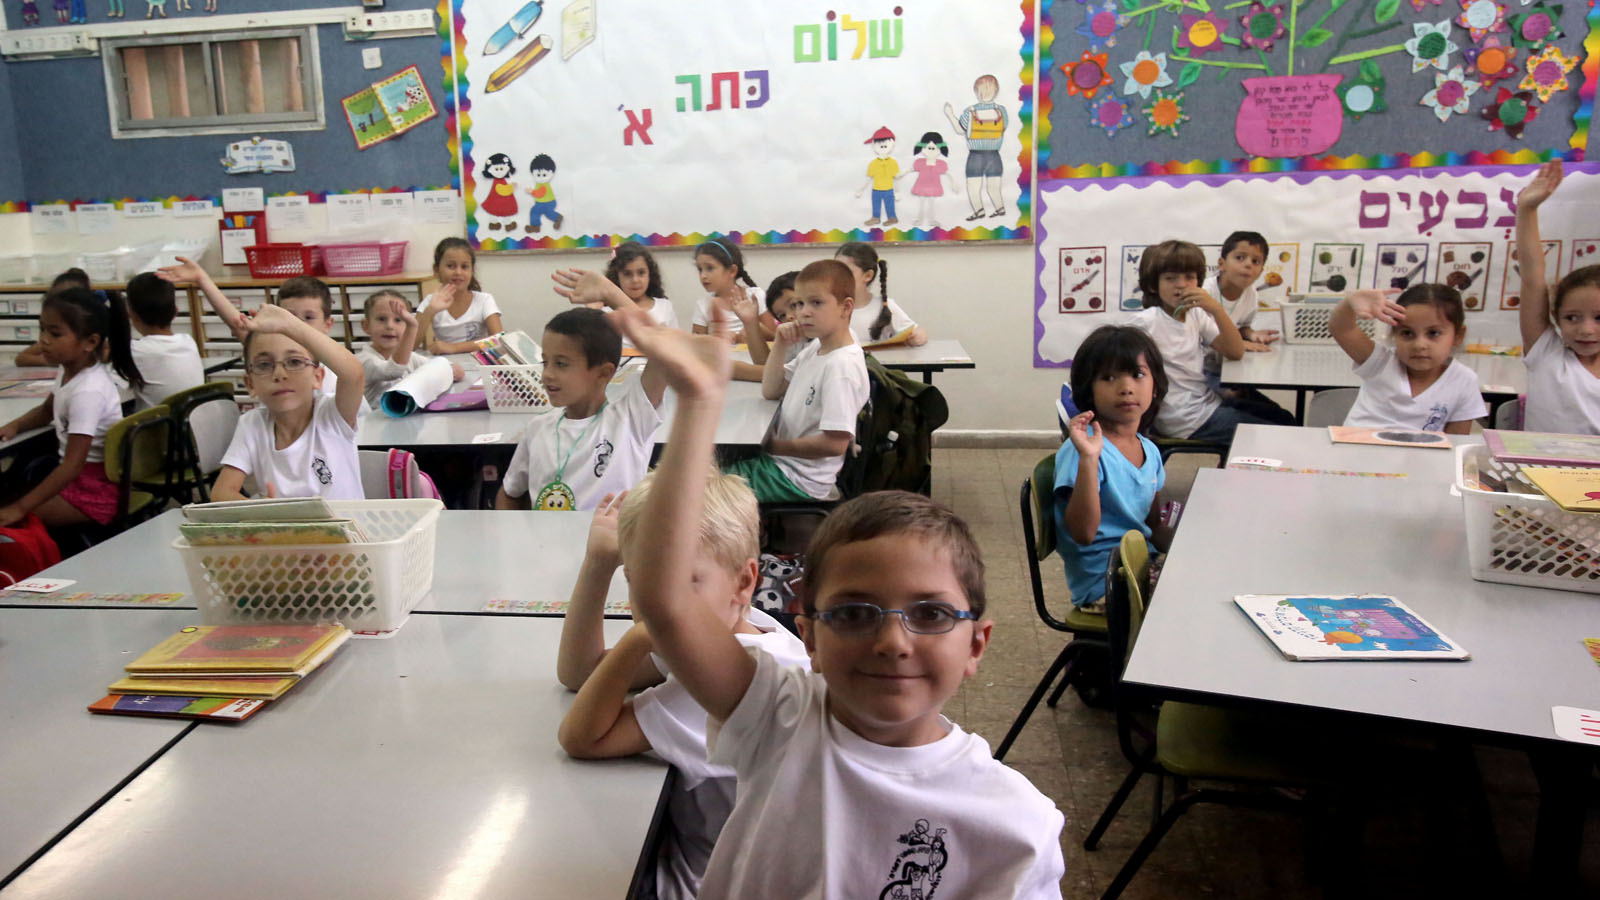 First Grade students seen in class on the first day of school at the Ben Gurion Elementary School in Rehavia, Jerusalem. Photo by Yossi Zamir/Flash90